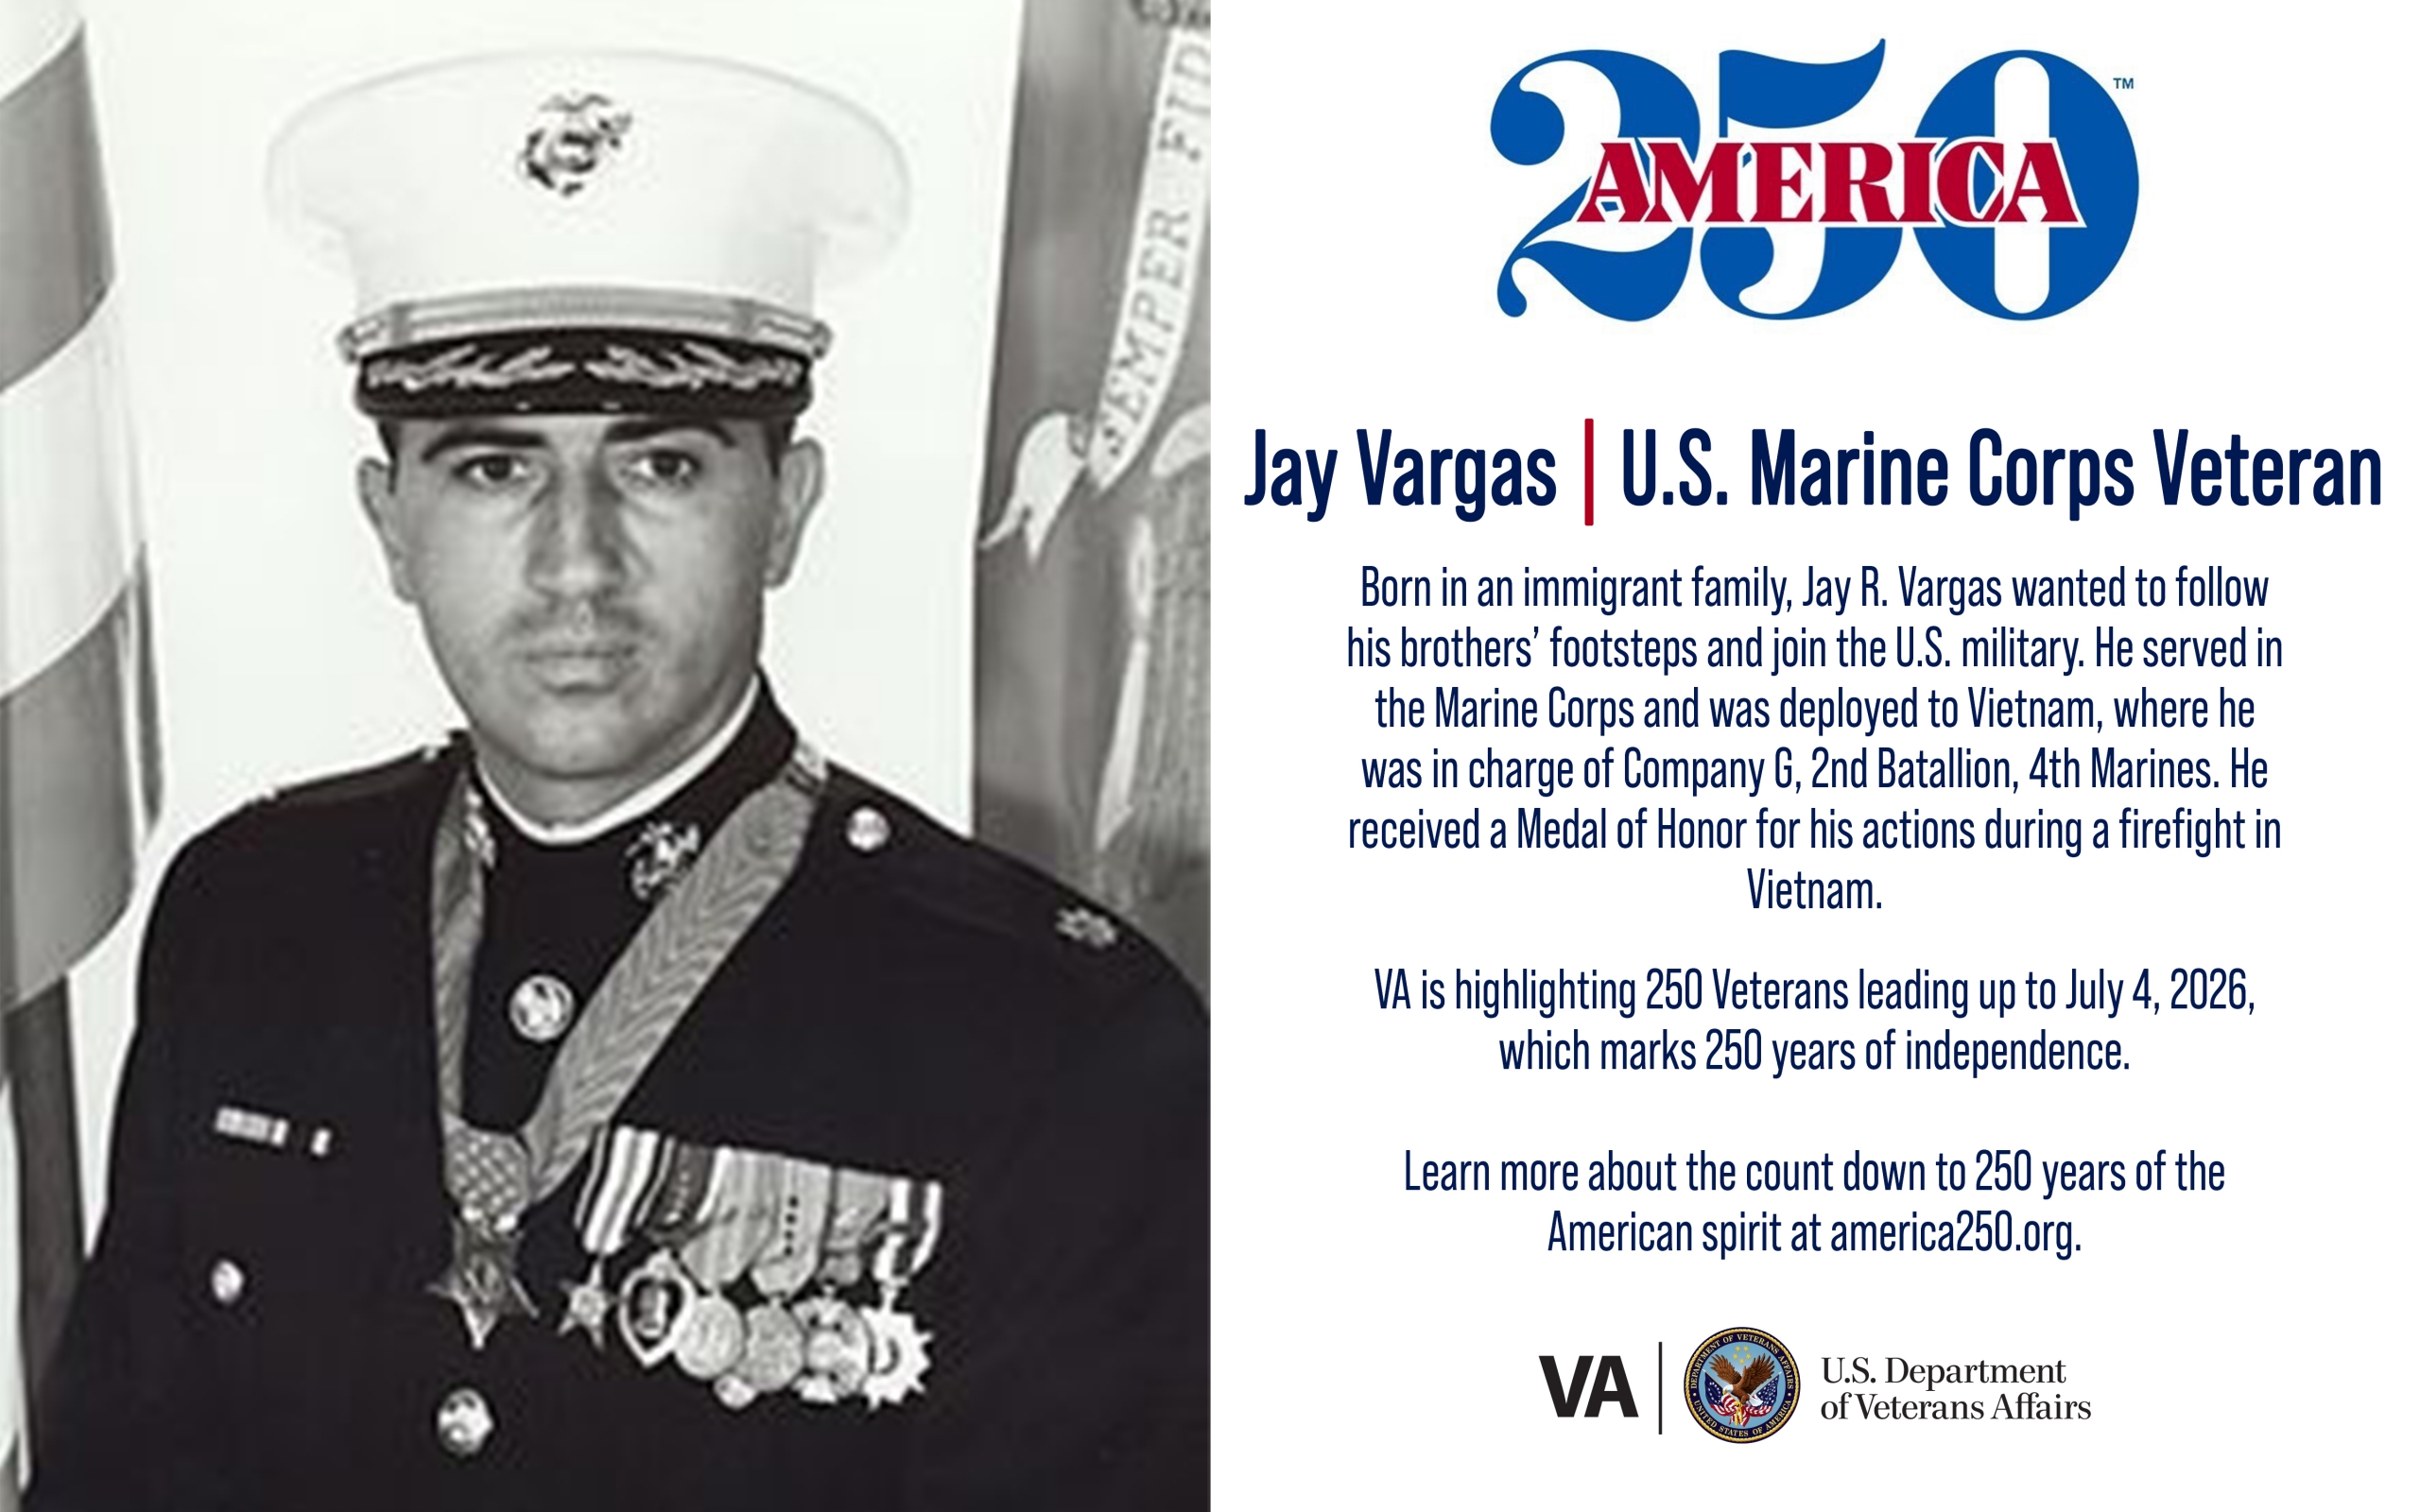 This week’s America250 salute is Marine Corps Veteran Jay Vargas, who received a Medal of Honor and a Purple Heart for action in Vietnam.